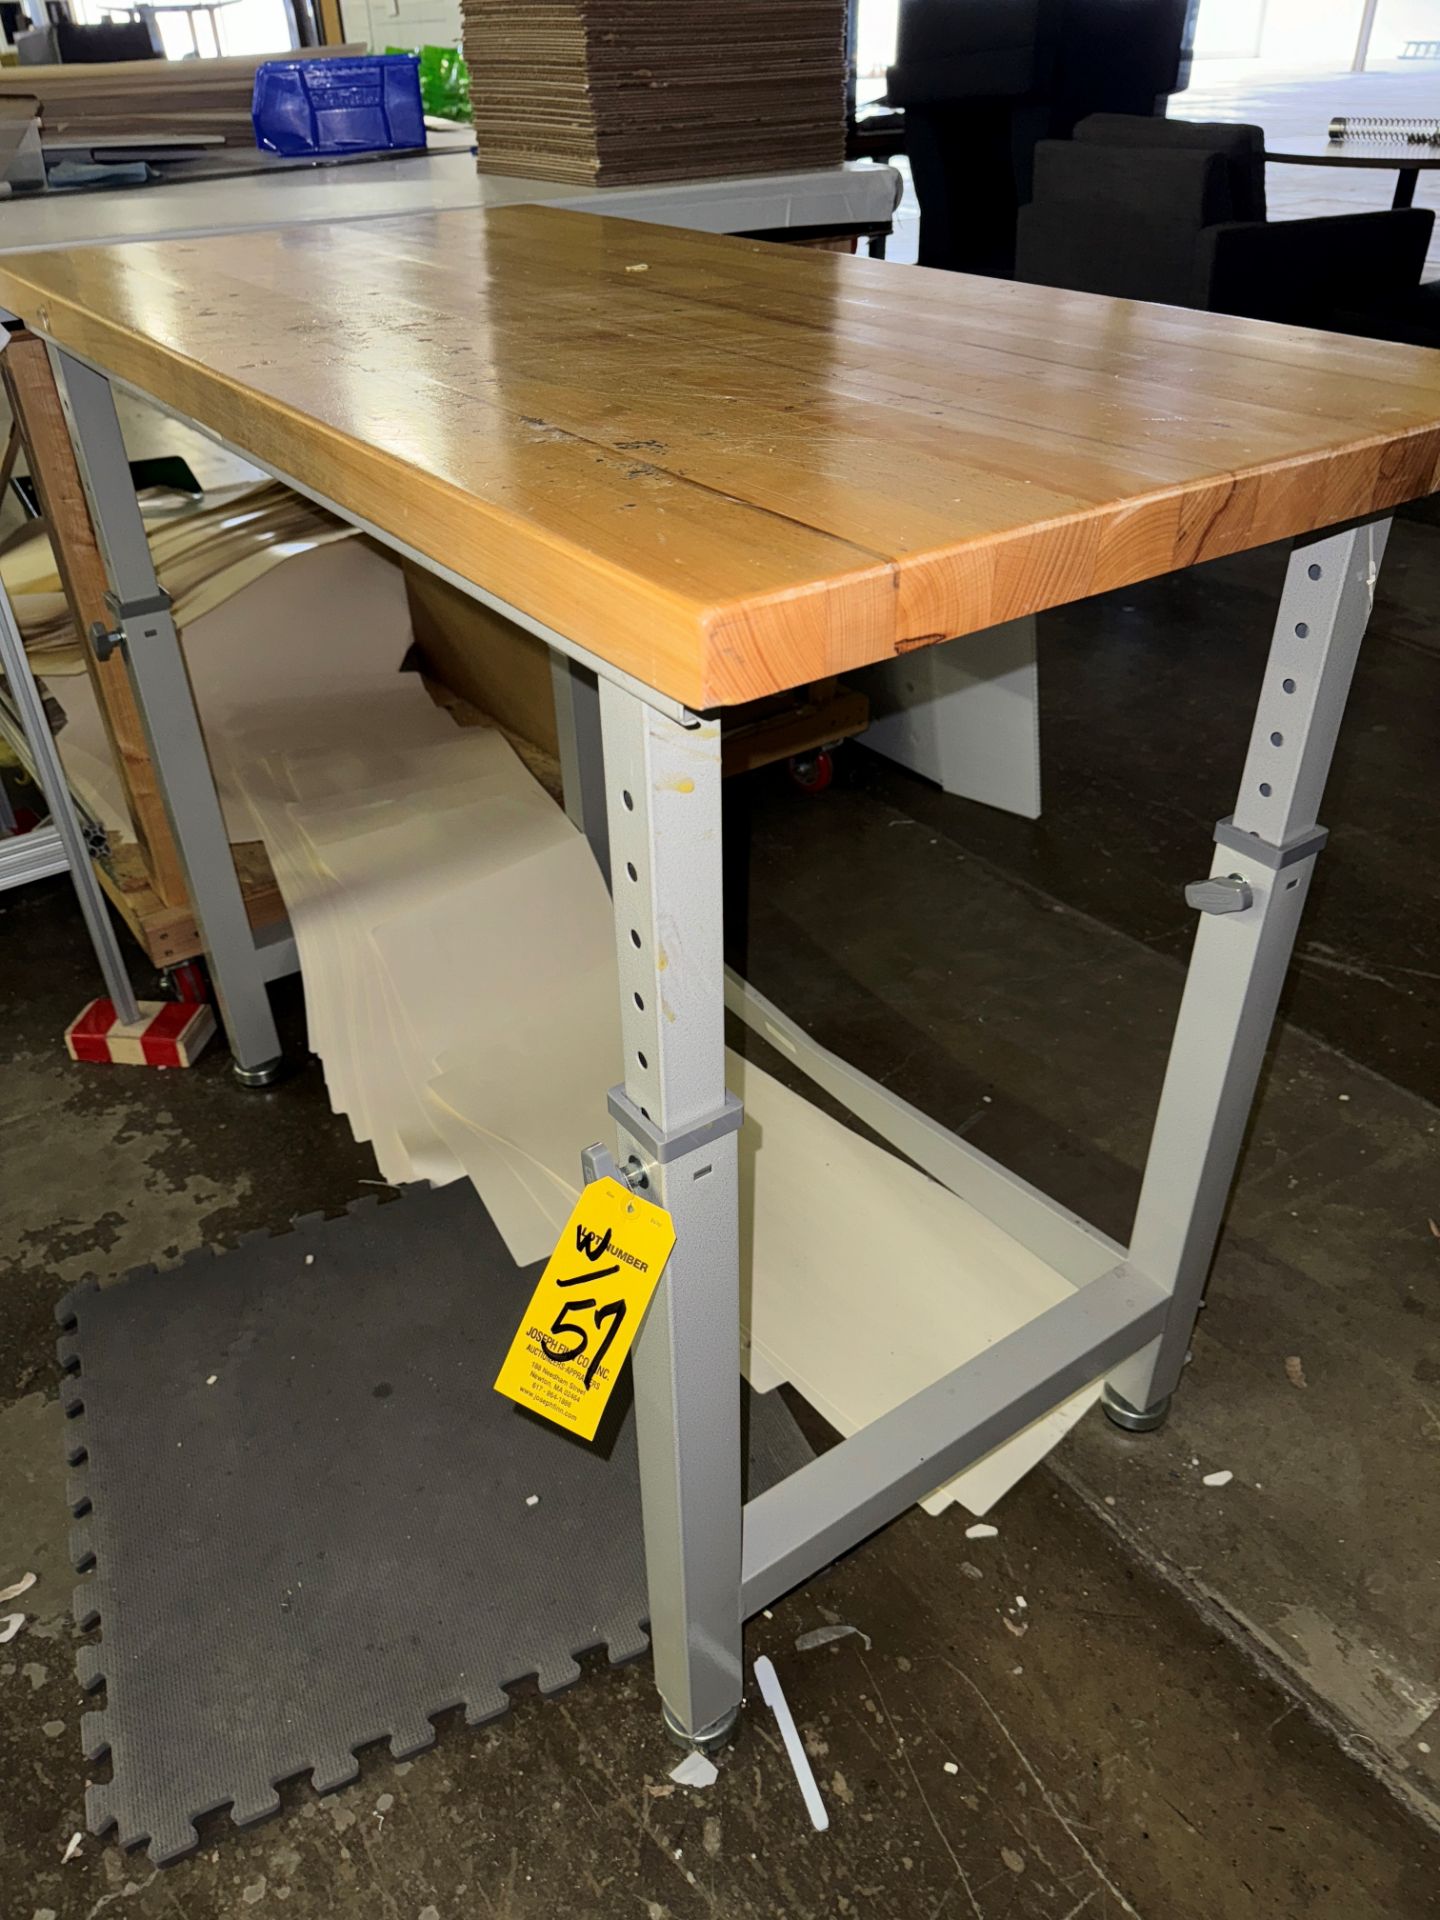 LOT (3) Steel Benches, 8' x 28", (1) Oak Top Bench 2' x 4' (Tag Reads 3) | Rig Fee $75